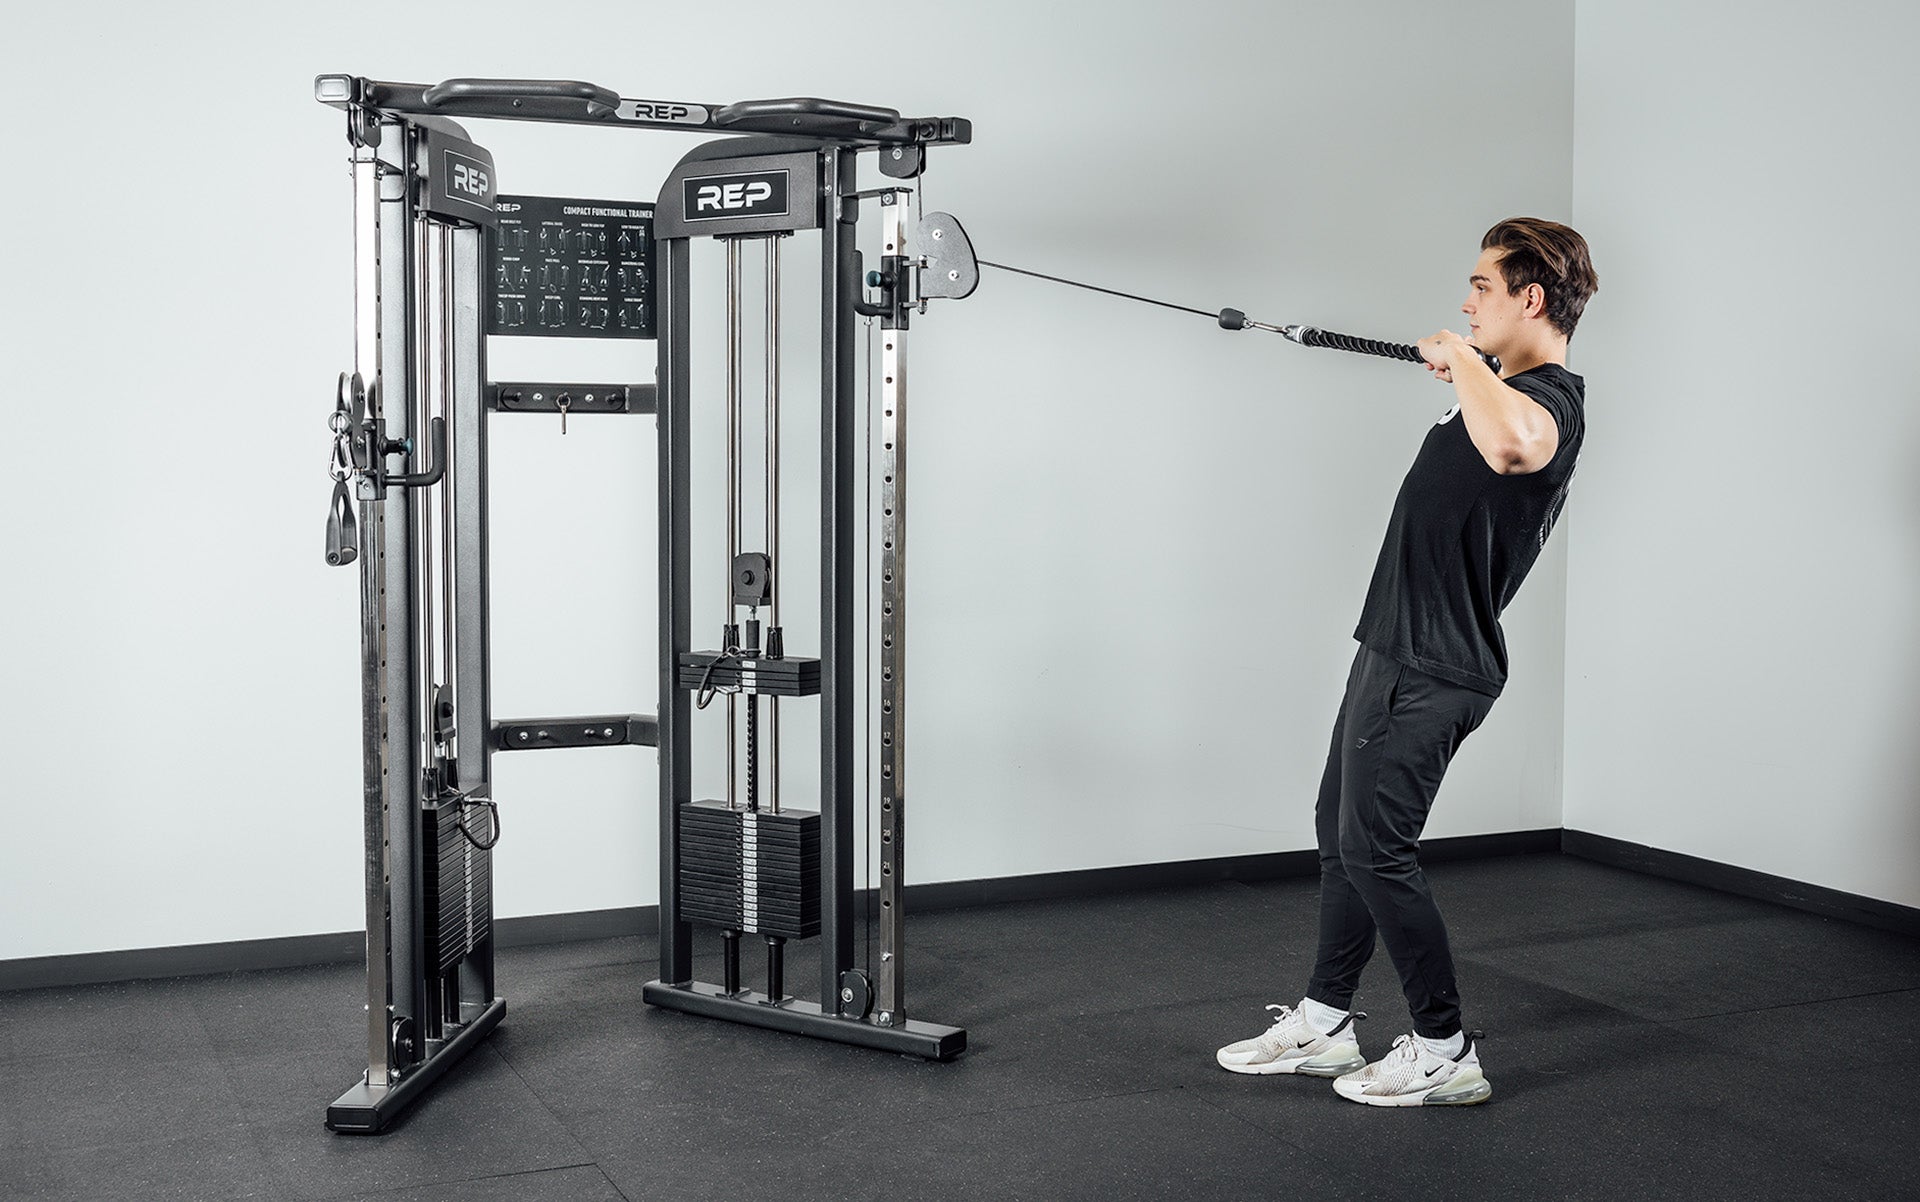 FT-3000 Compact Functional Trainer 2.0 Being Used for Cable High Row with Tricep Rope Cable Attachment